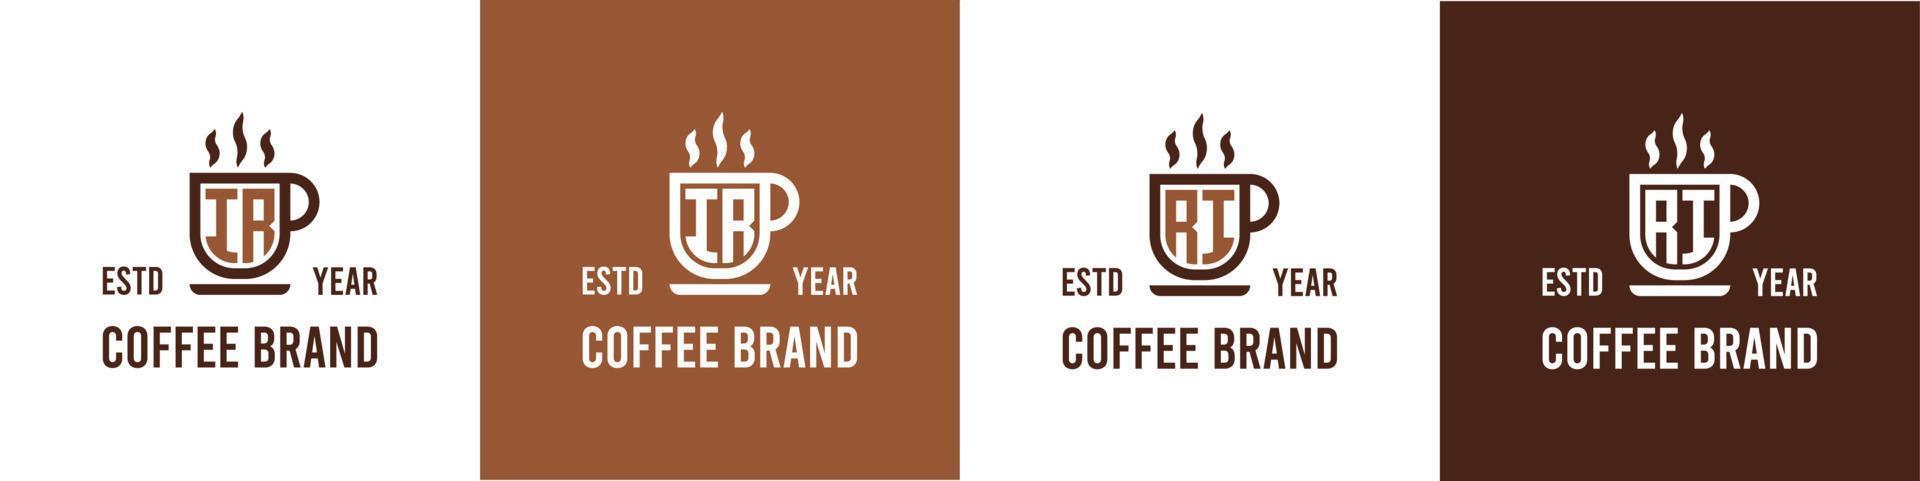 Letter IR and RI Coffee Logo, suitable for any business related to Coffee, Tea, or Other with IR or RI initials. vector